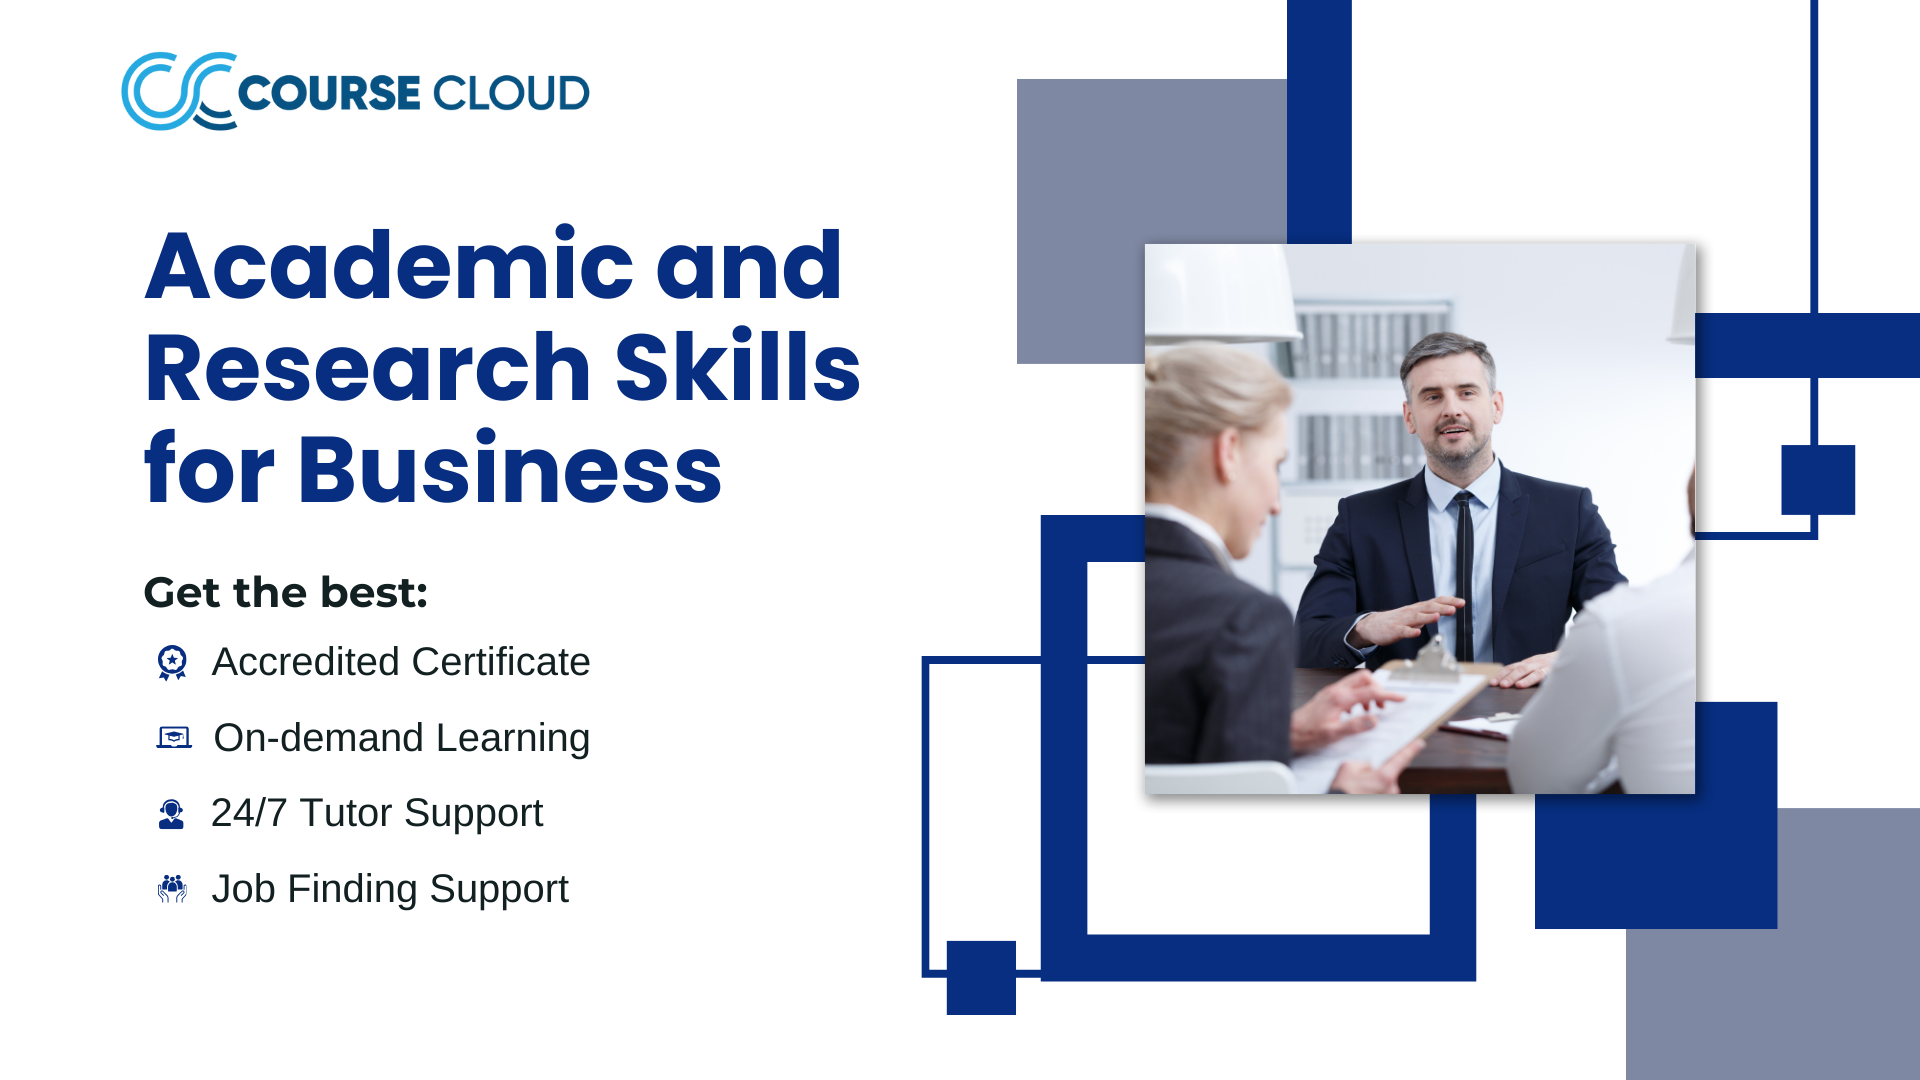 Academic and Research Skills for Business